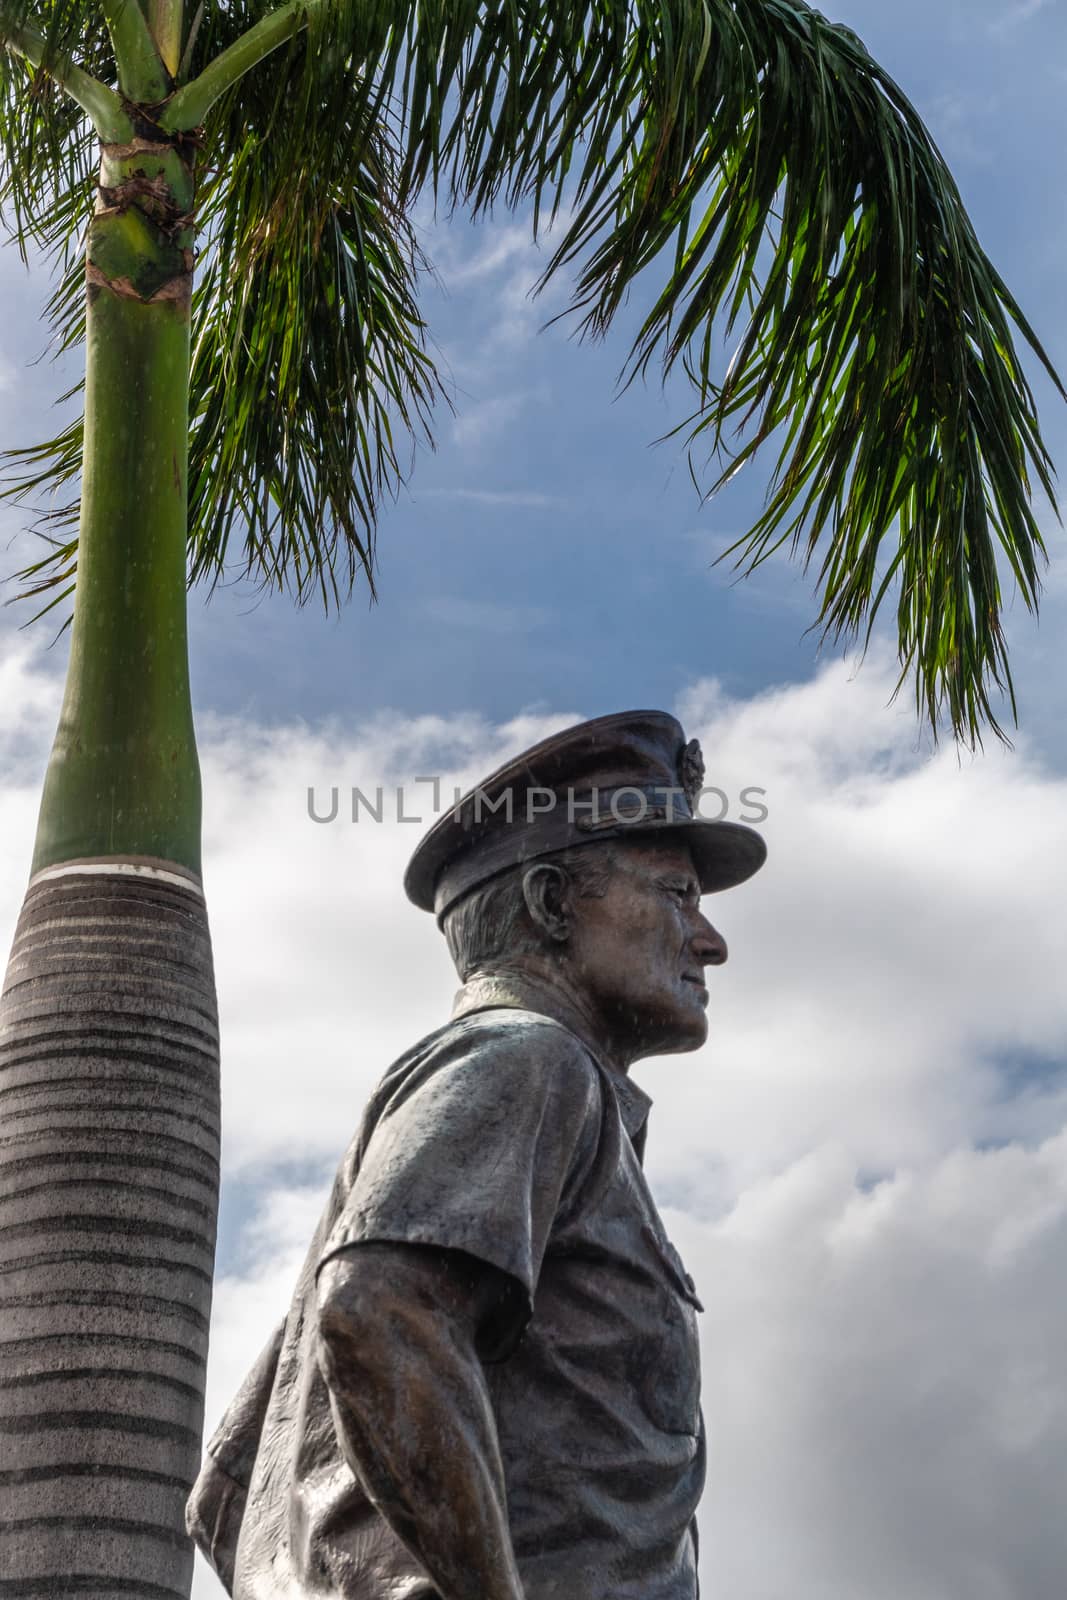 Oahu, Hawaii, USA. - January 10, 2020: Pearl Harbor. Bronze statue of Fleet Admiral Chester W. Nimitz near where USS Missouri is docked. Closeup of side of chest under green palm tree and blue sky.